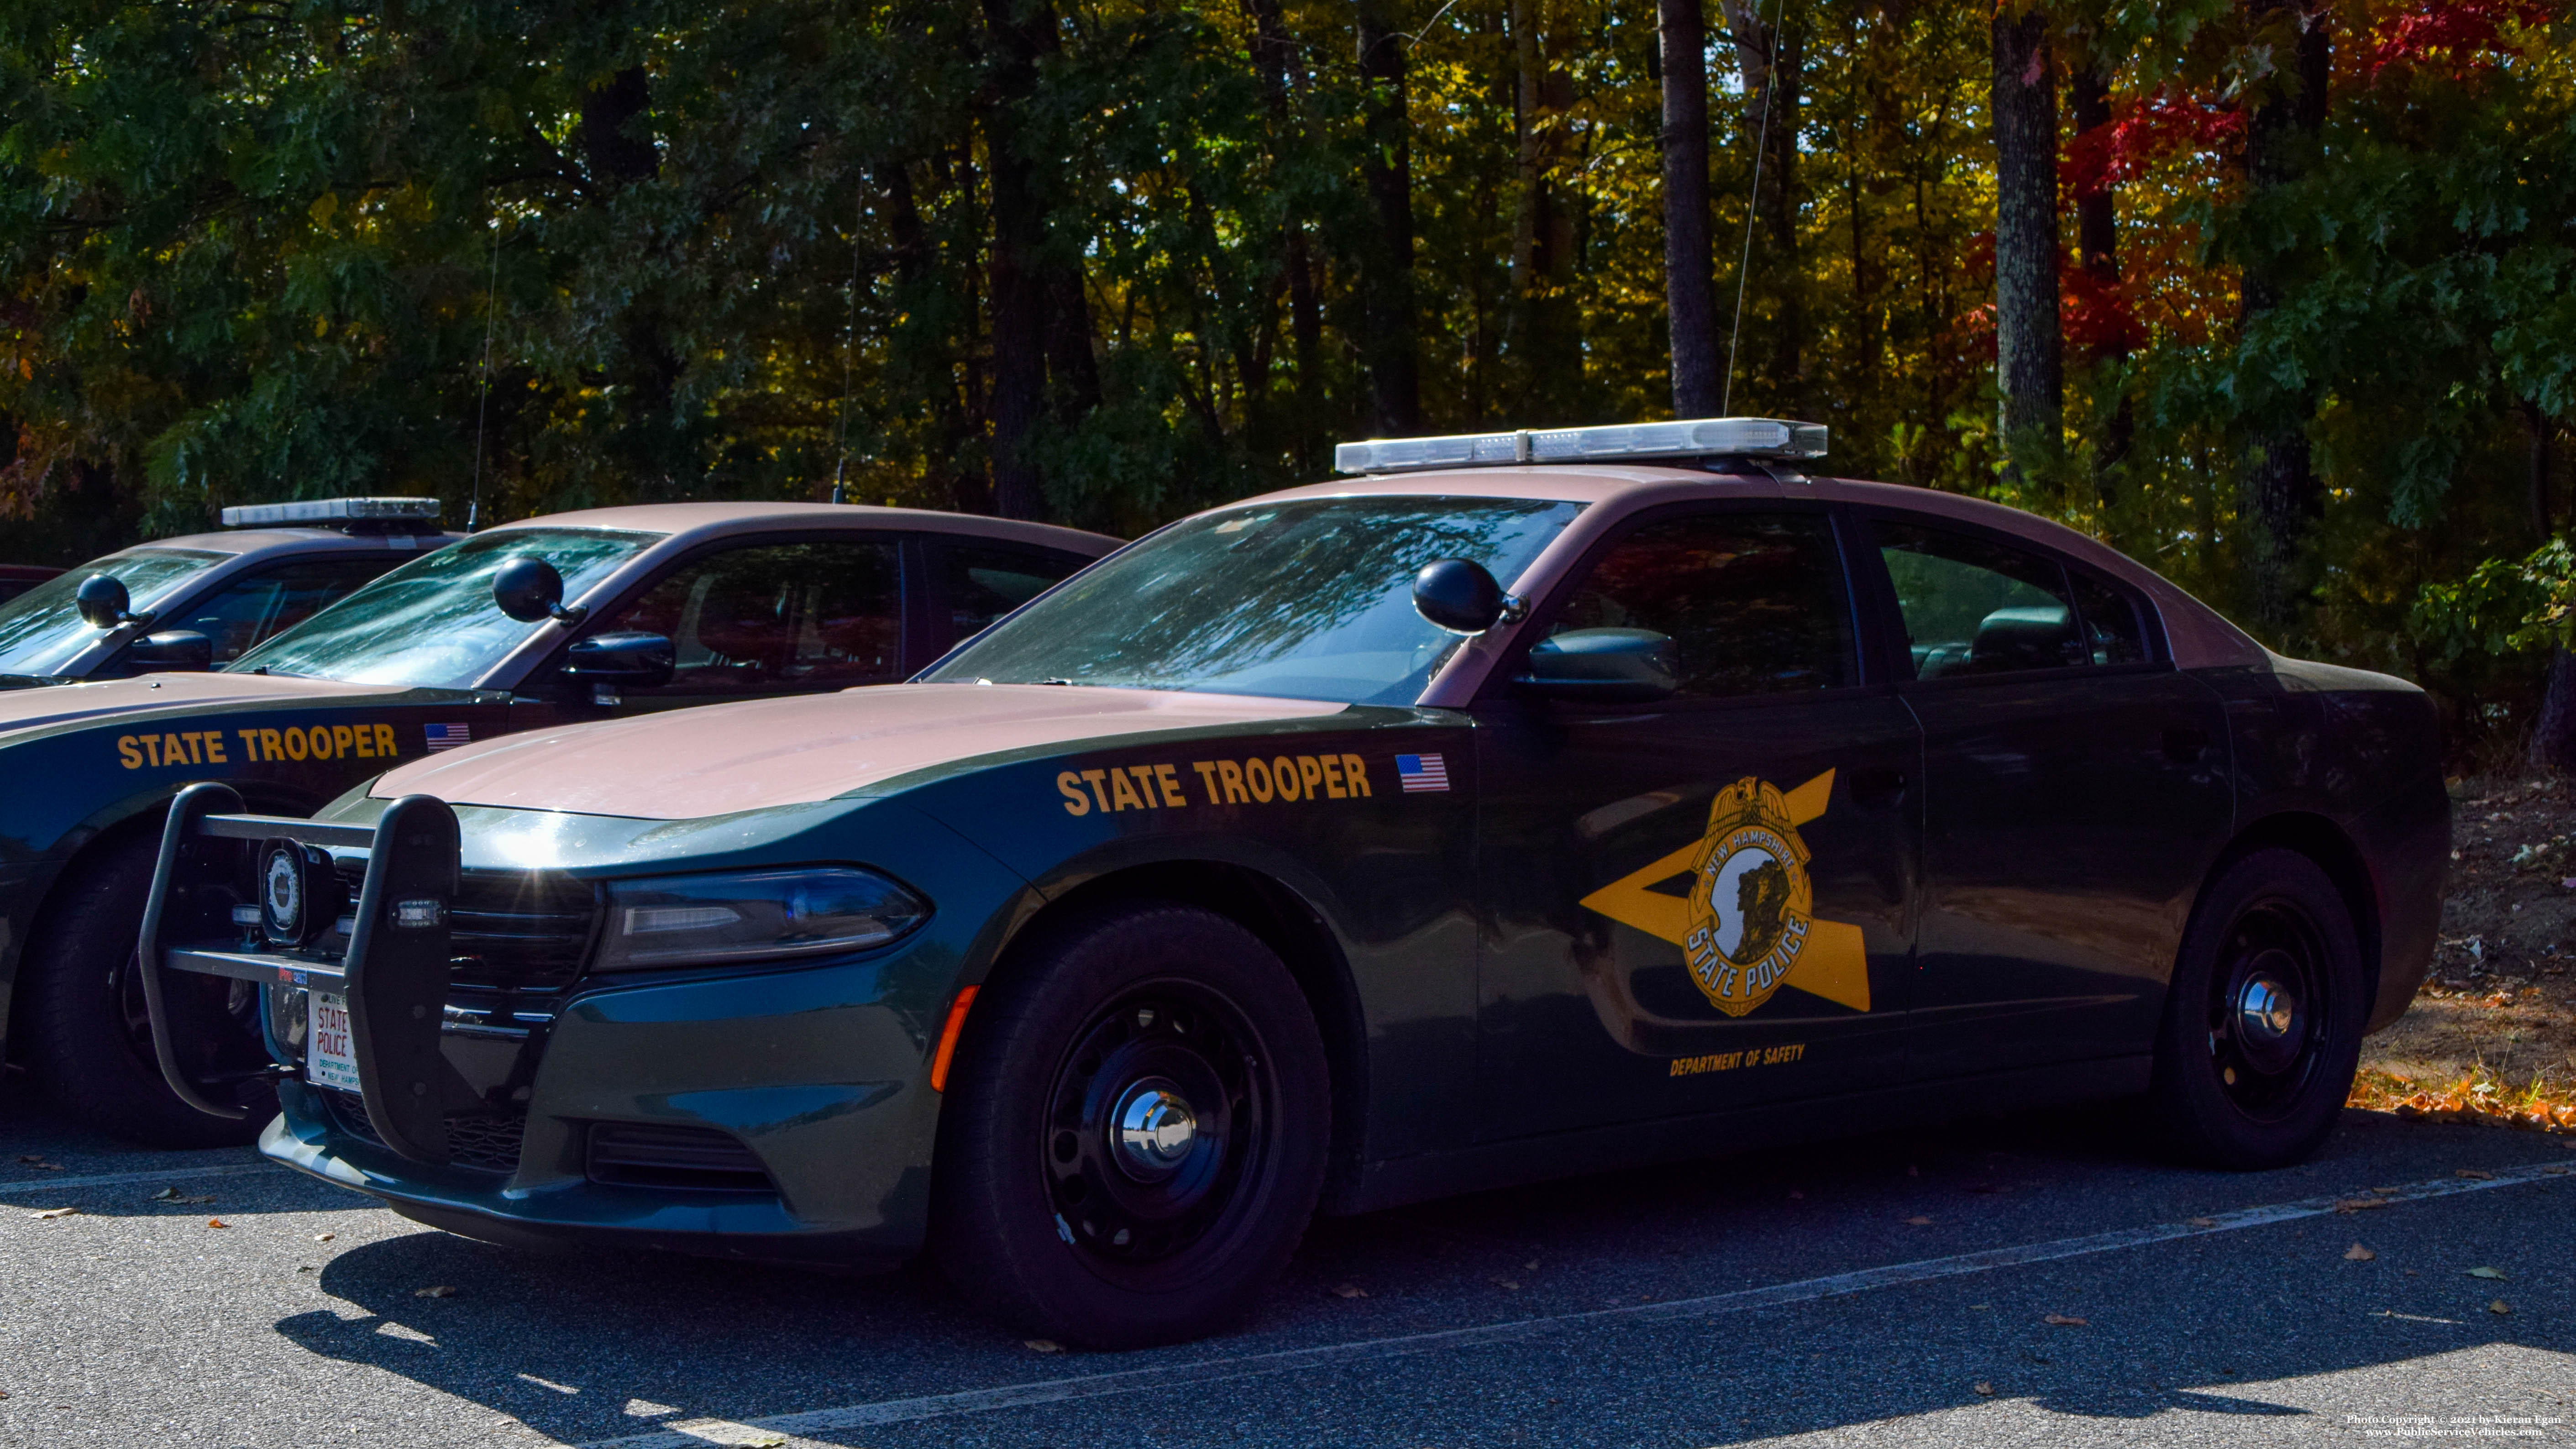 A photo  of New Hampshire State Police
            Cruiser 130, a 2015-2019 Dodge Charger             taken by Kieran Egan